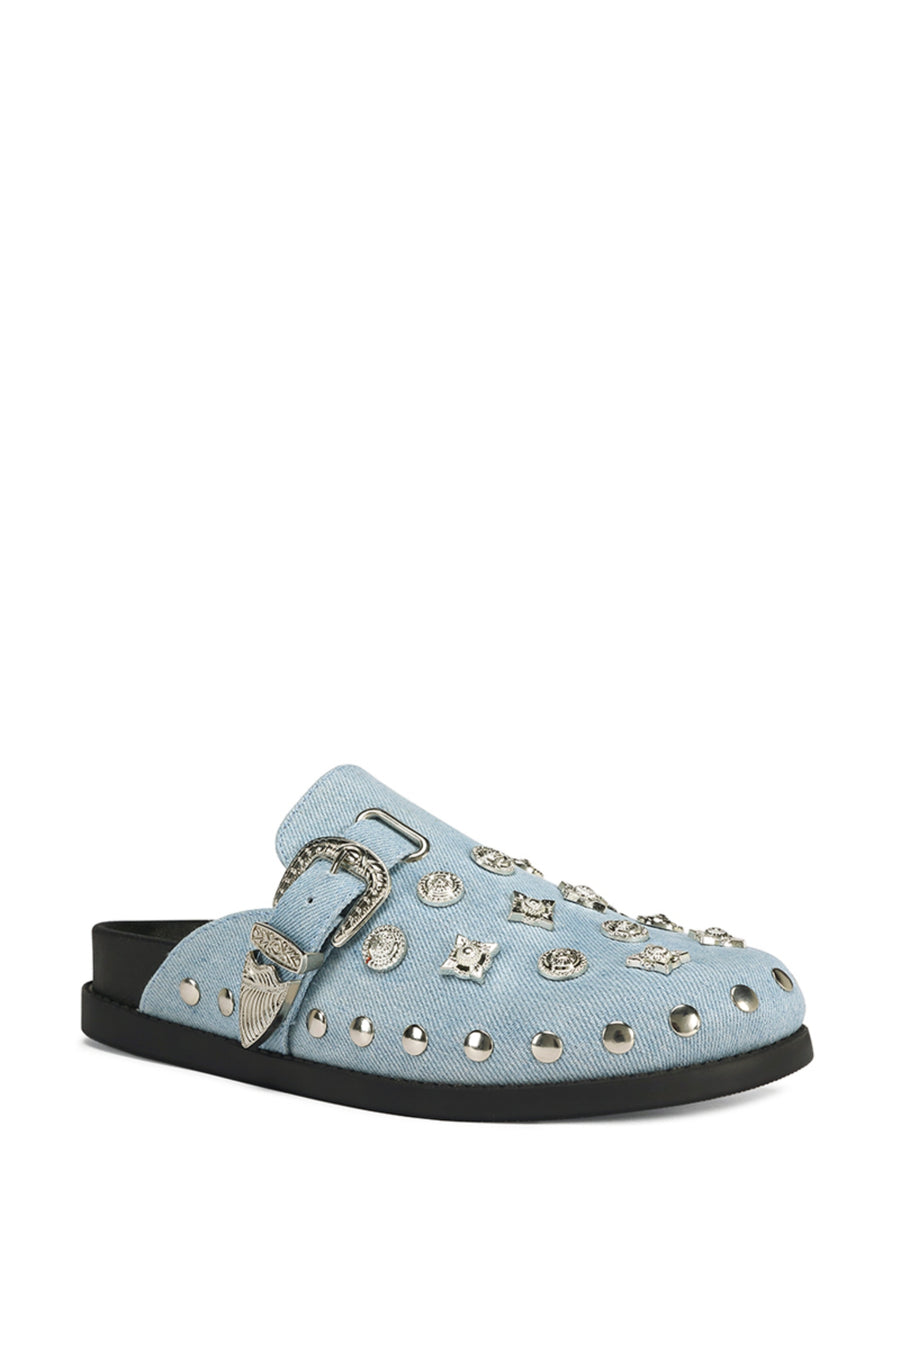 angled view of light wash denim slip on western mule with silver studded accents and a western belt buckle detail